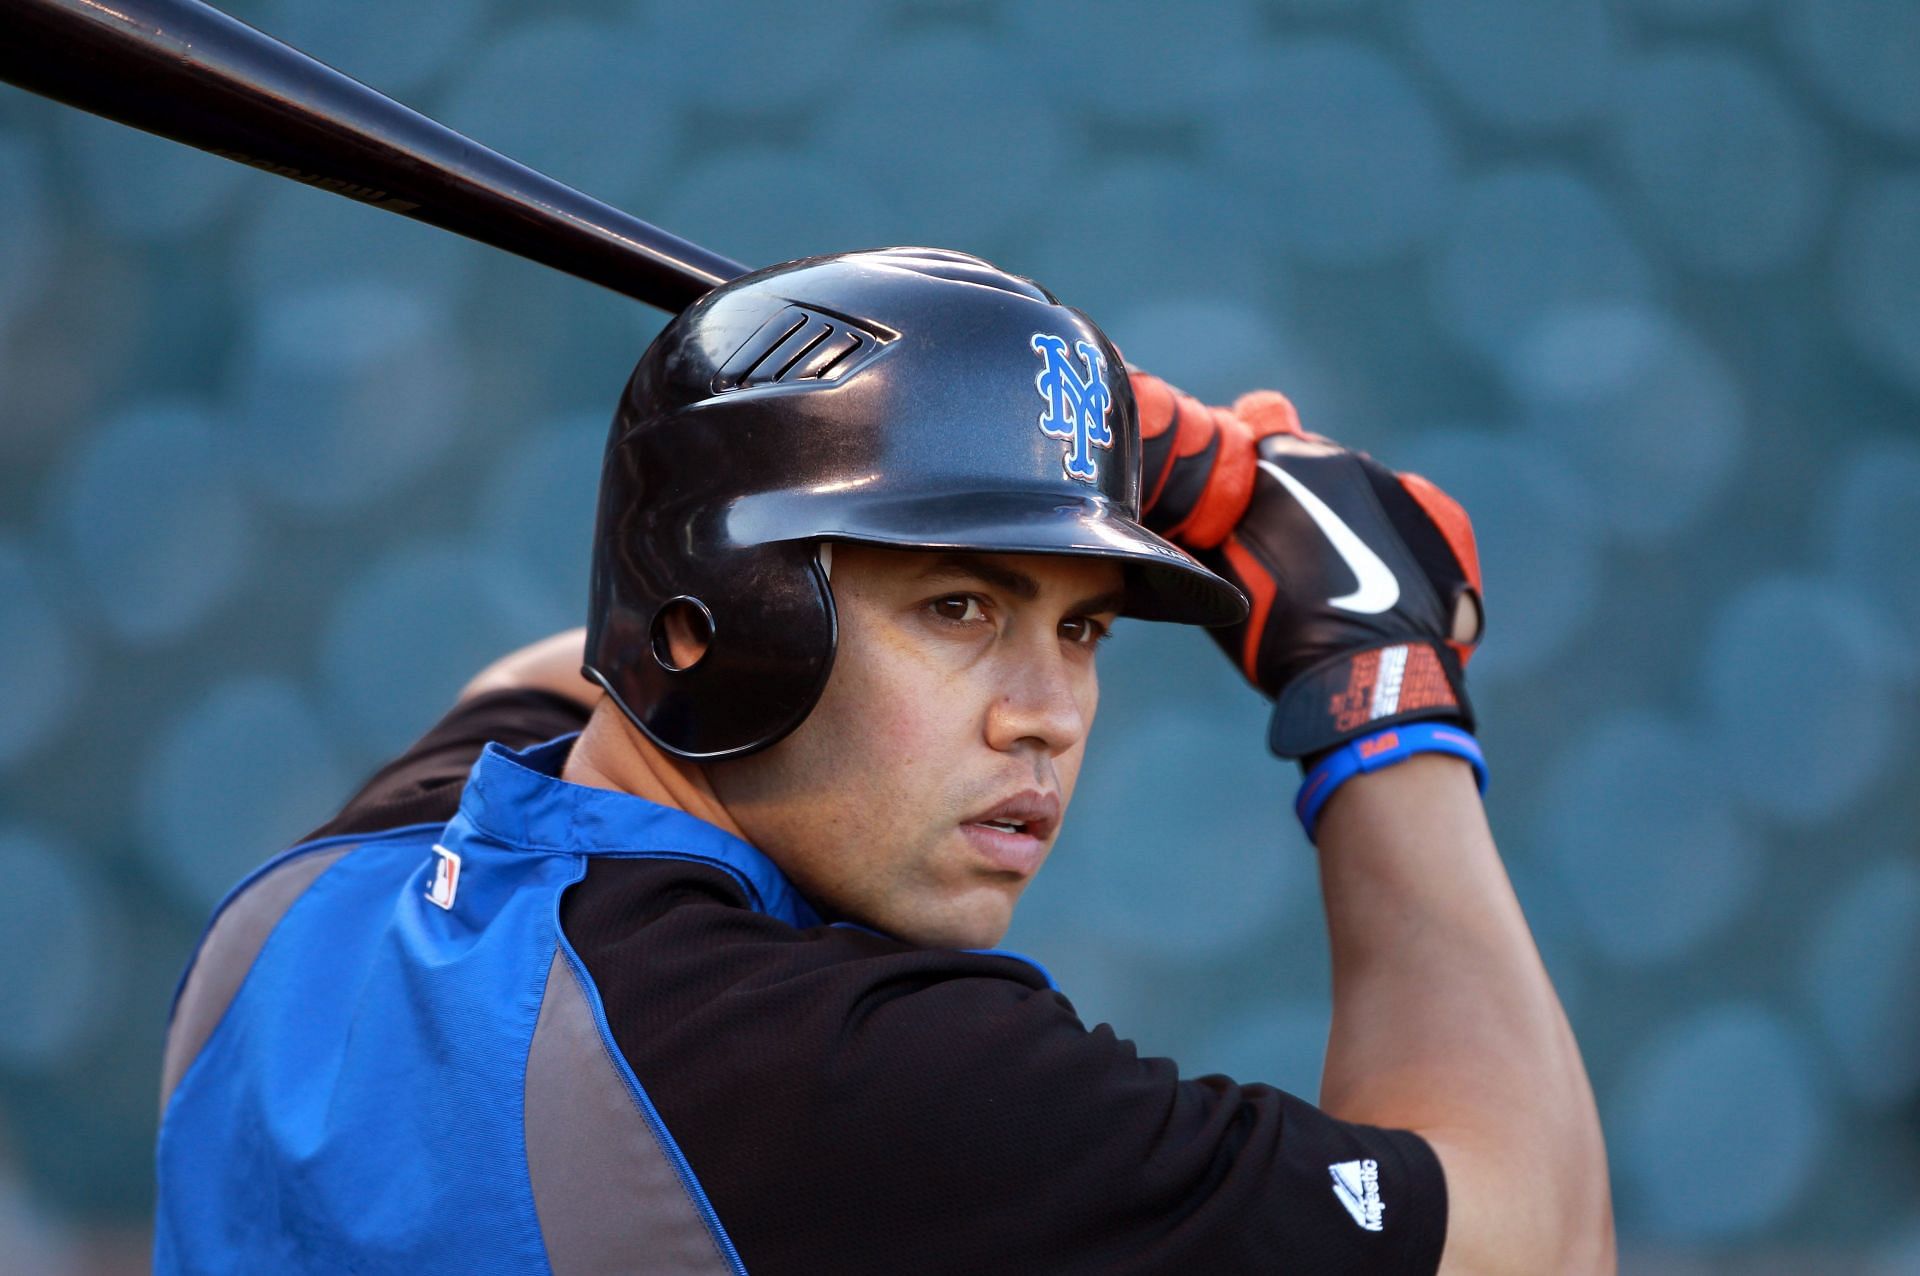 Carlos Beltran played for the Astros and New York Mets